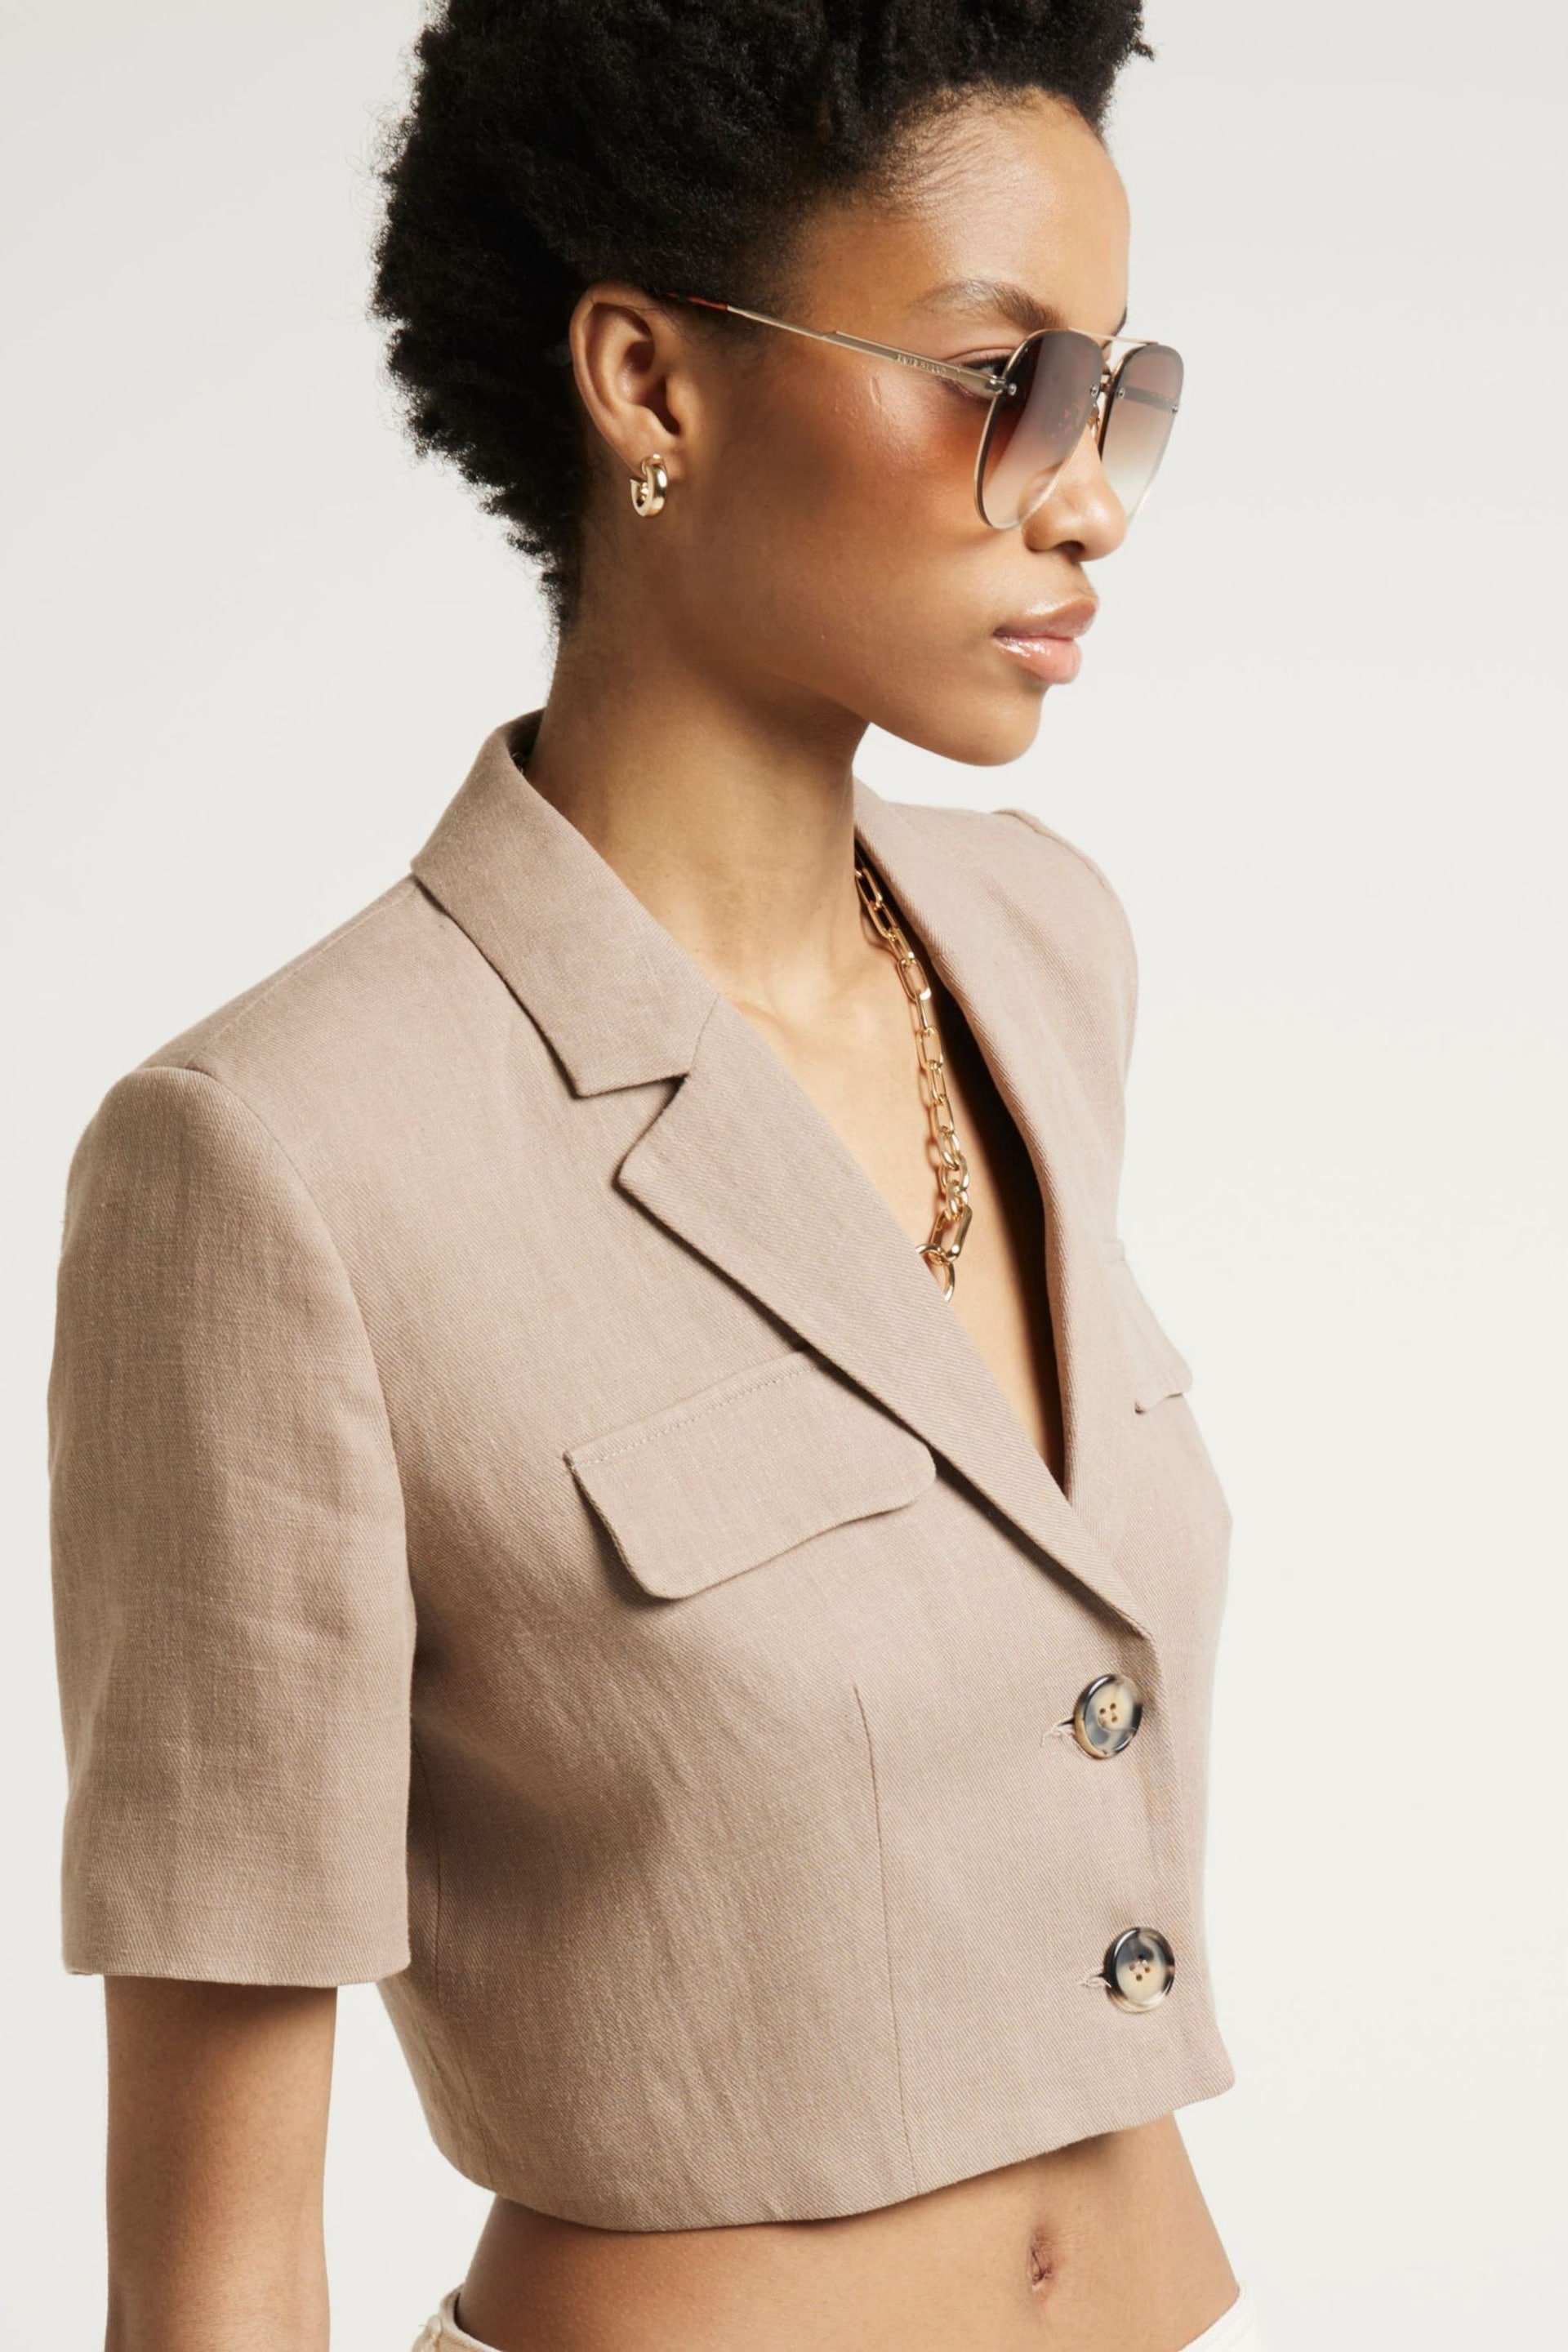 River Island Beige Cropped Structured Jacket - Image 2 of 5